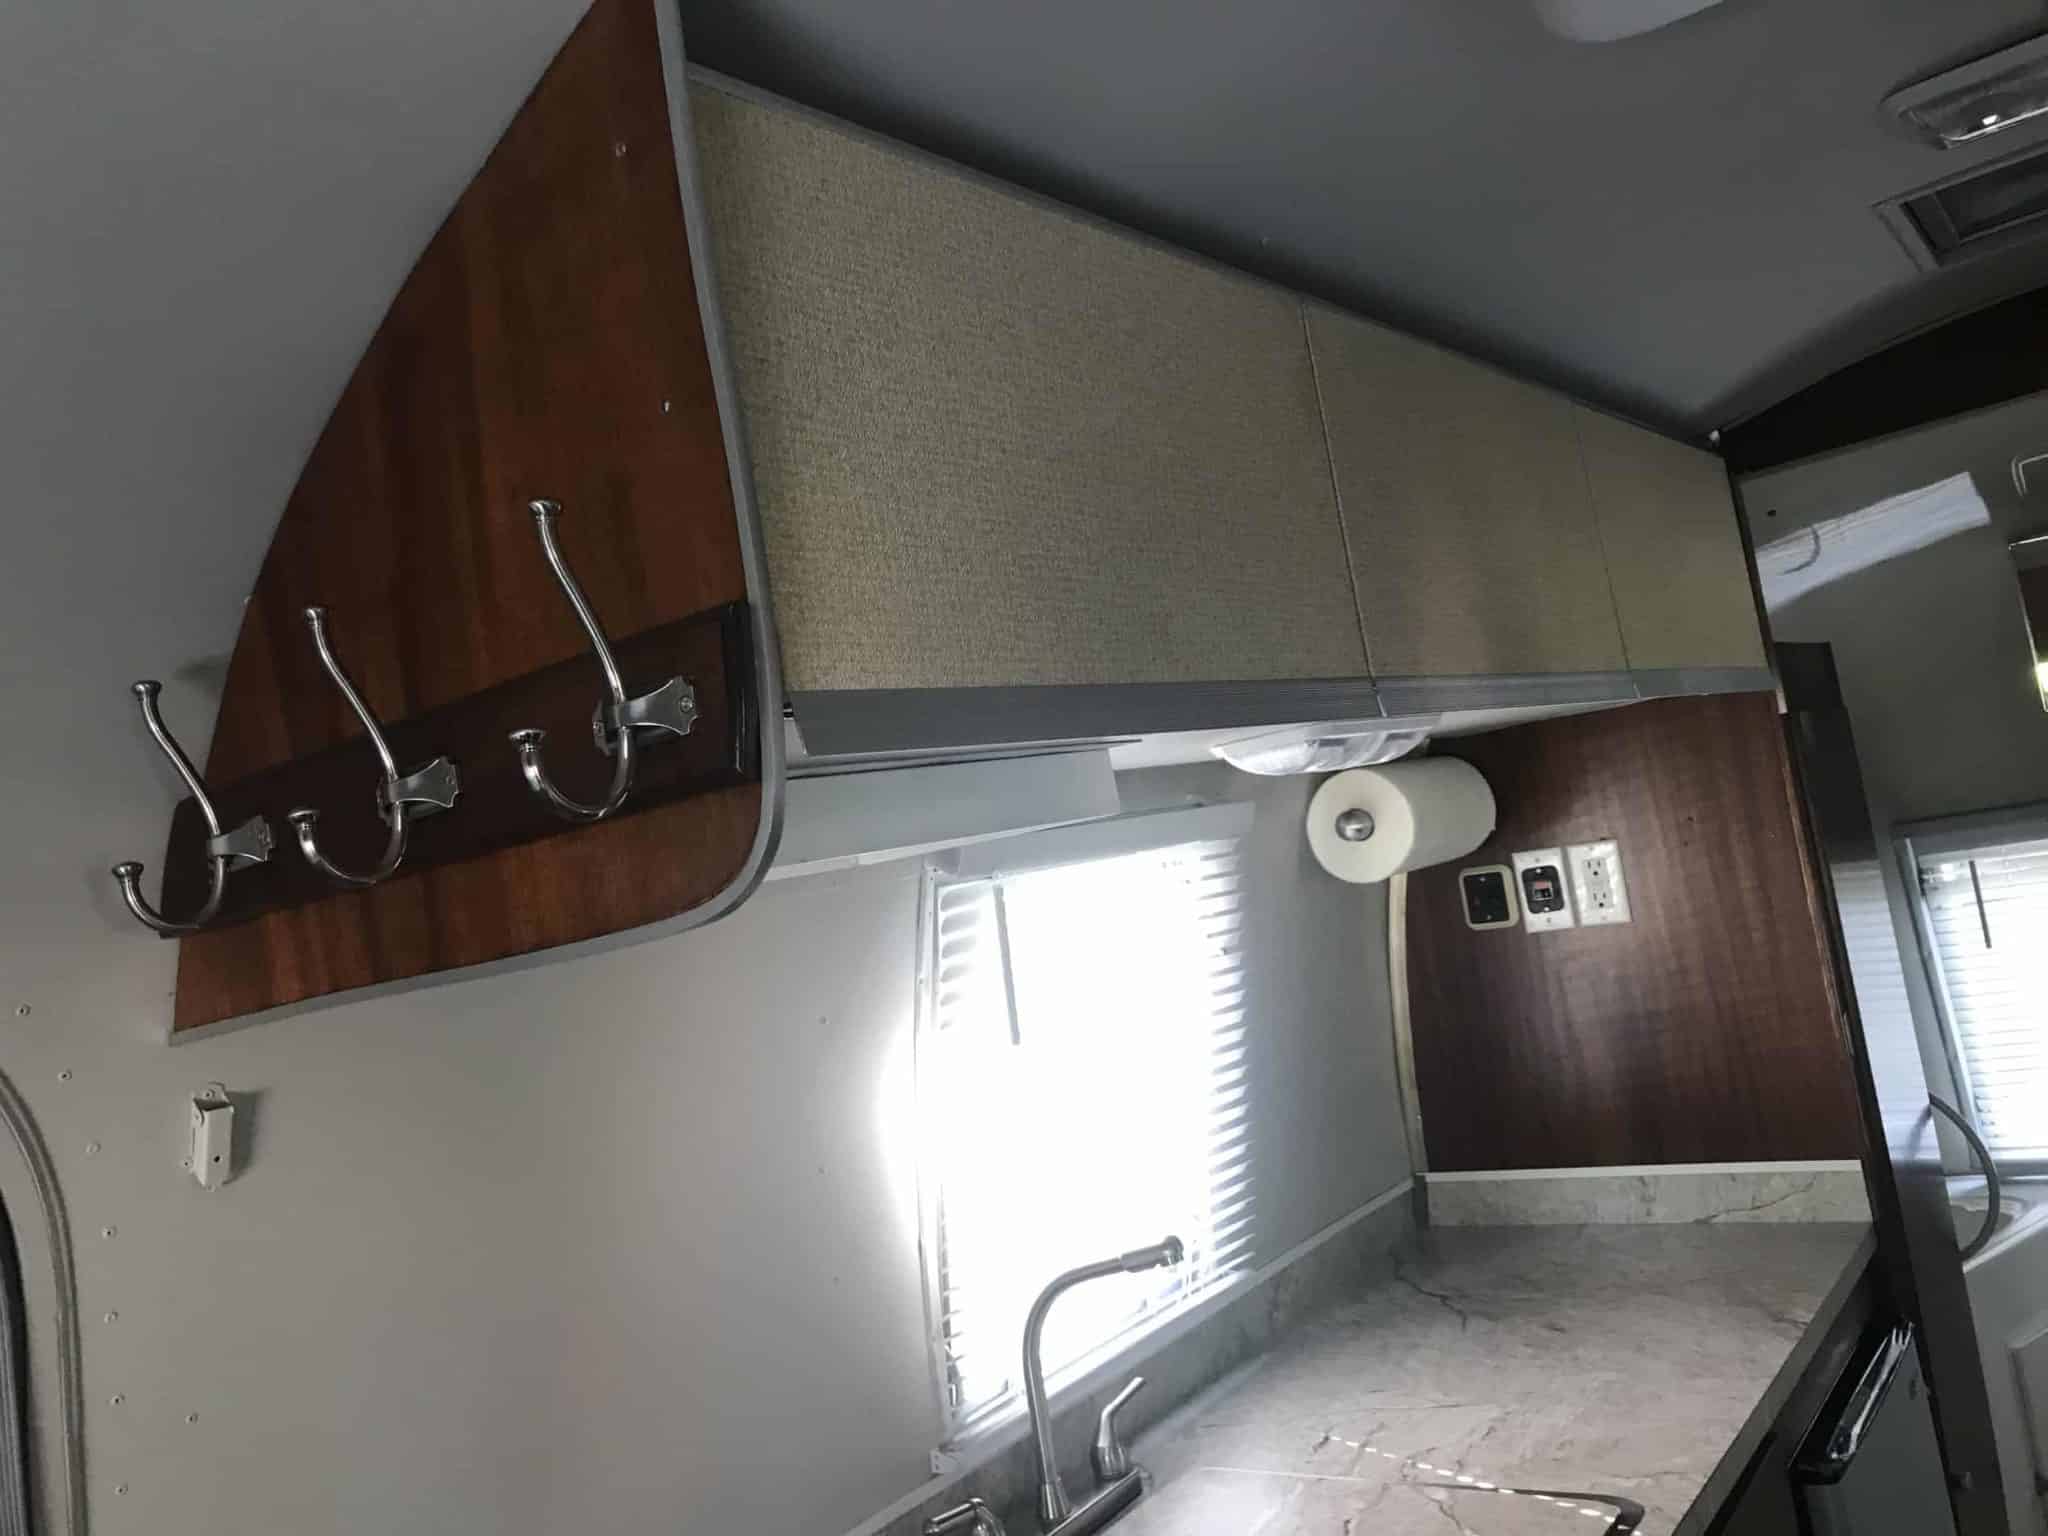 1965 Airstream 20FT Globe Trotter For Sale in Moro - Airstream Marketplace